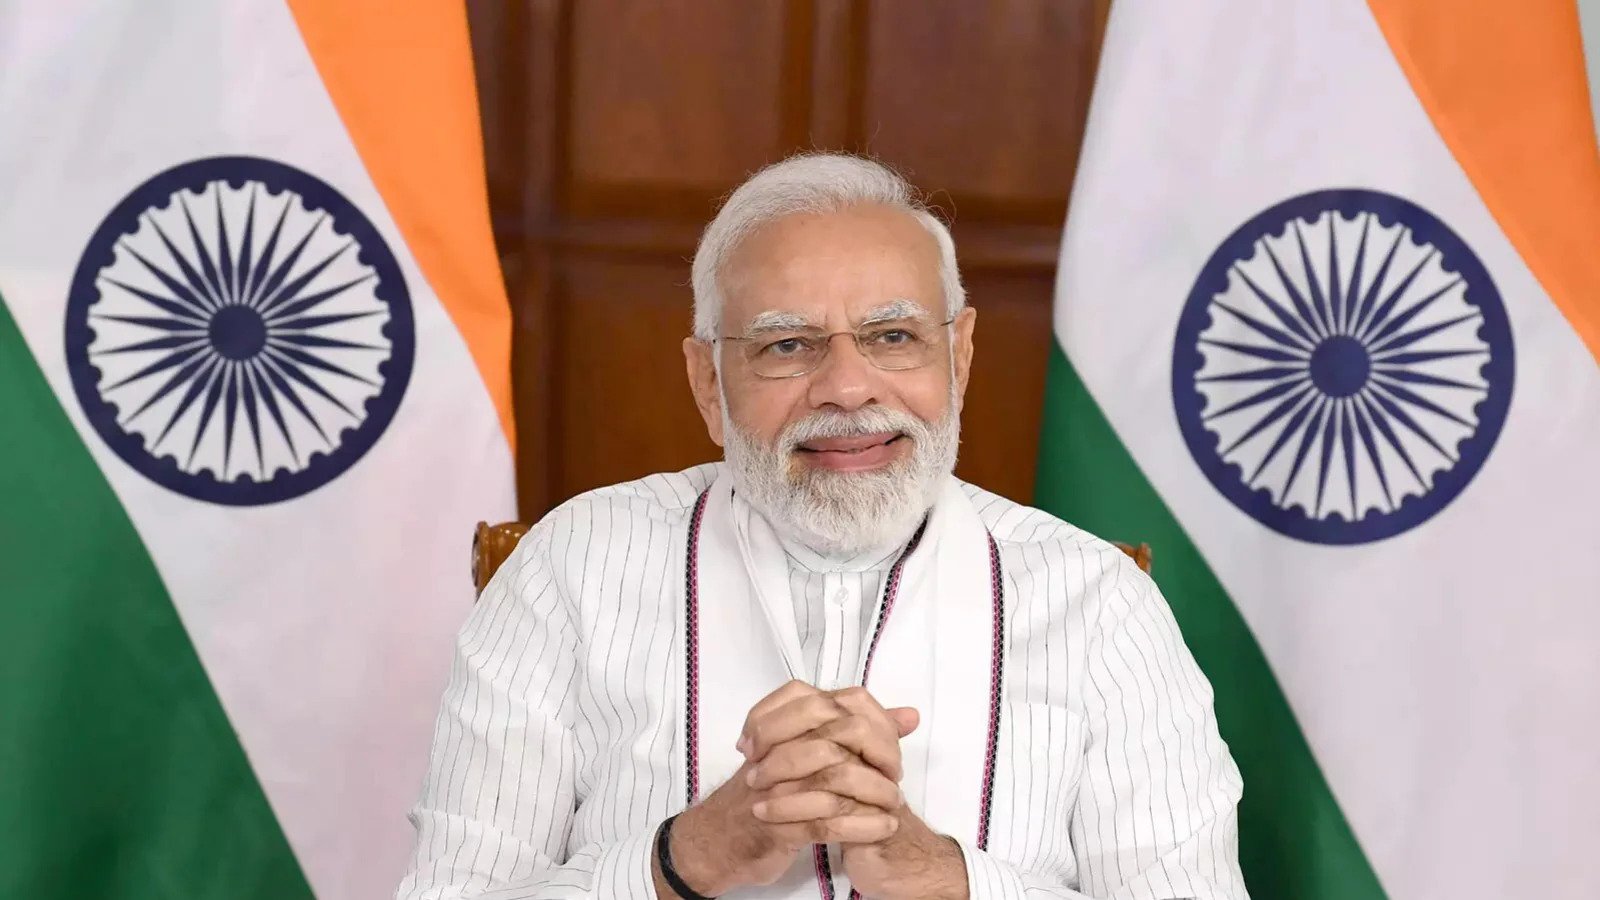 PM Modi To Government 'Fill 10 Lakh Jobs In 1.5 Years'